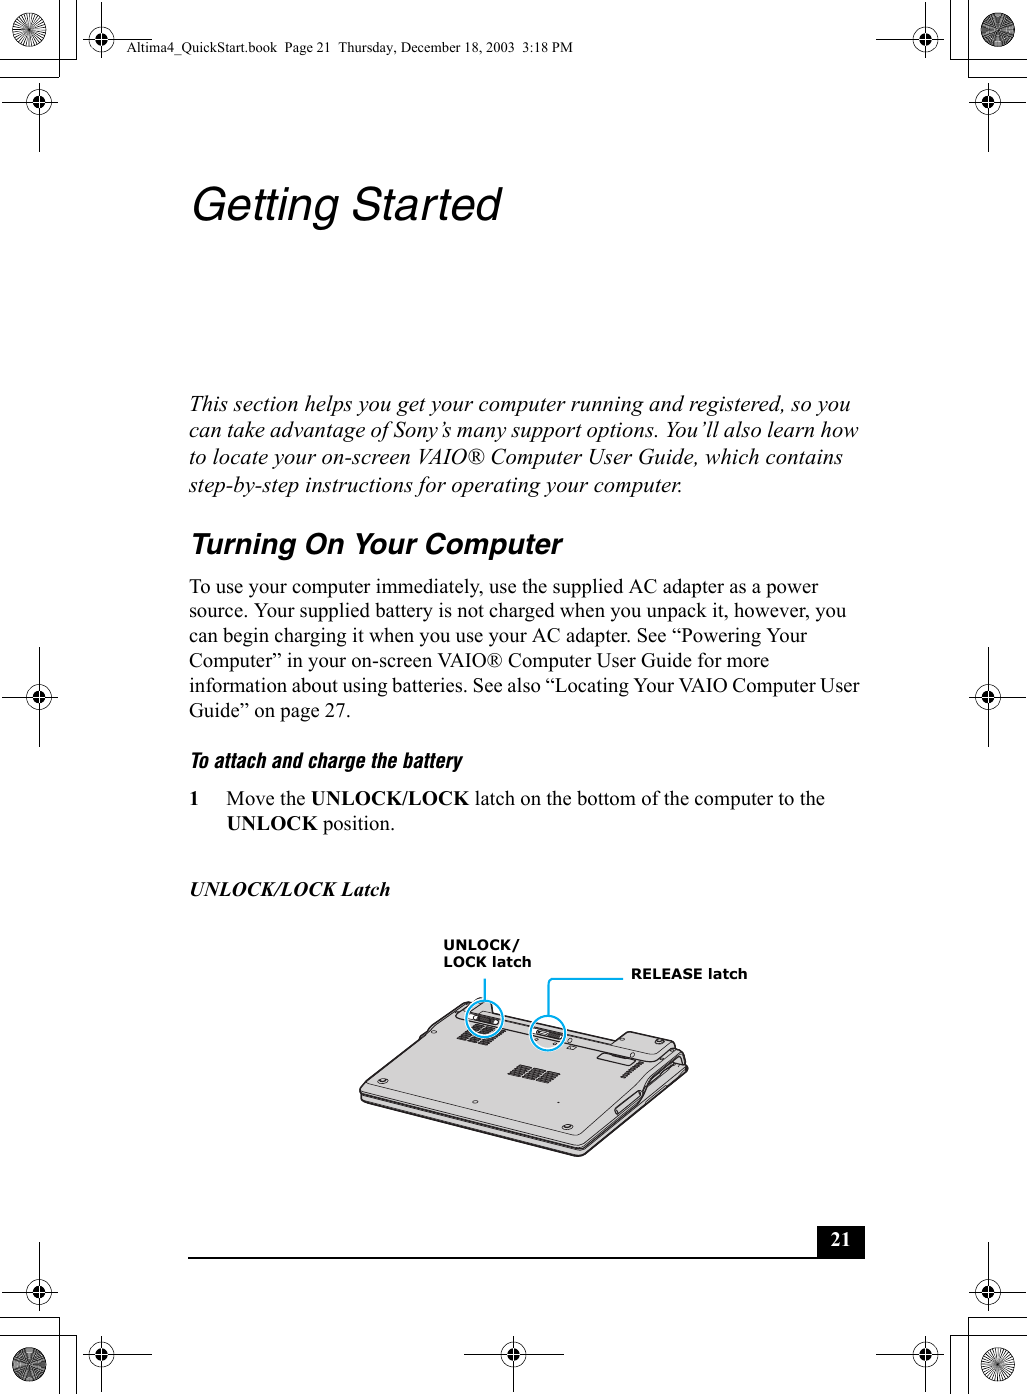 21Getting StartedThis section helps you get your computer running and registered, so you can take advantage of Sony’s many support options. You’ll also learn how to locate your on-screen VAIO® Computer User Guide, which contains step-by-step instructions for operating your computer.Turning On Your ComputerTo use your computer immediately, use the supplied AC adapter as a power source. Your supplied battery is not charged when you unpack it, however, you can begin charging it when you use your AC adapter. See “Powering Your Computer” in your on-screen VAIO® Computer User Guide for more information about using batteries. See also “Locating Your VAIO Computer User Guide” on page 27.To attach and charge the battery 1Move the UNLOCK/LOCK latch on the bottom of the computer to the UNLOCK position.UNLOCK/LOCK LatchRELEASE latchUNLOCK/LOCK latchAltima4_QuickStart.book  Page 21  Thursday, December 18, 2003  3:18 PM